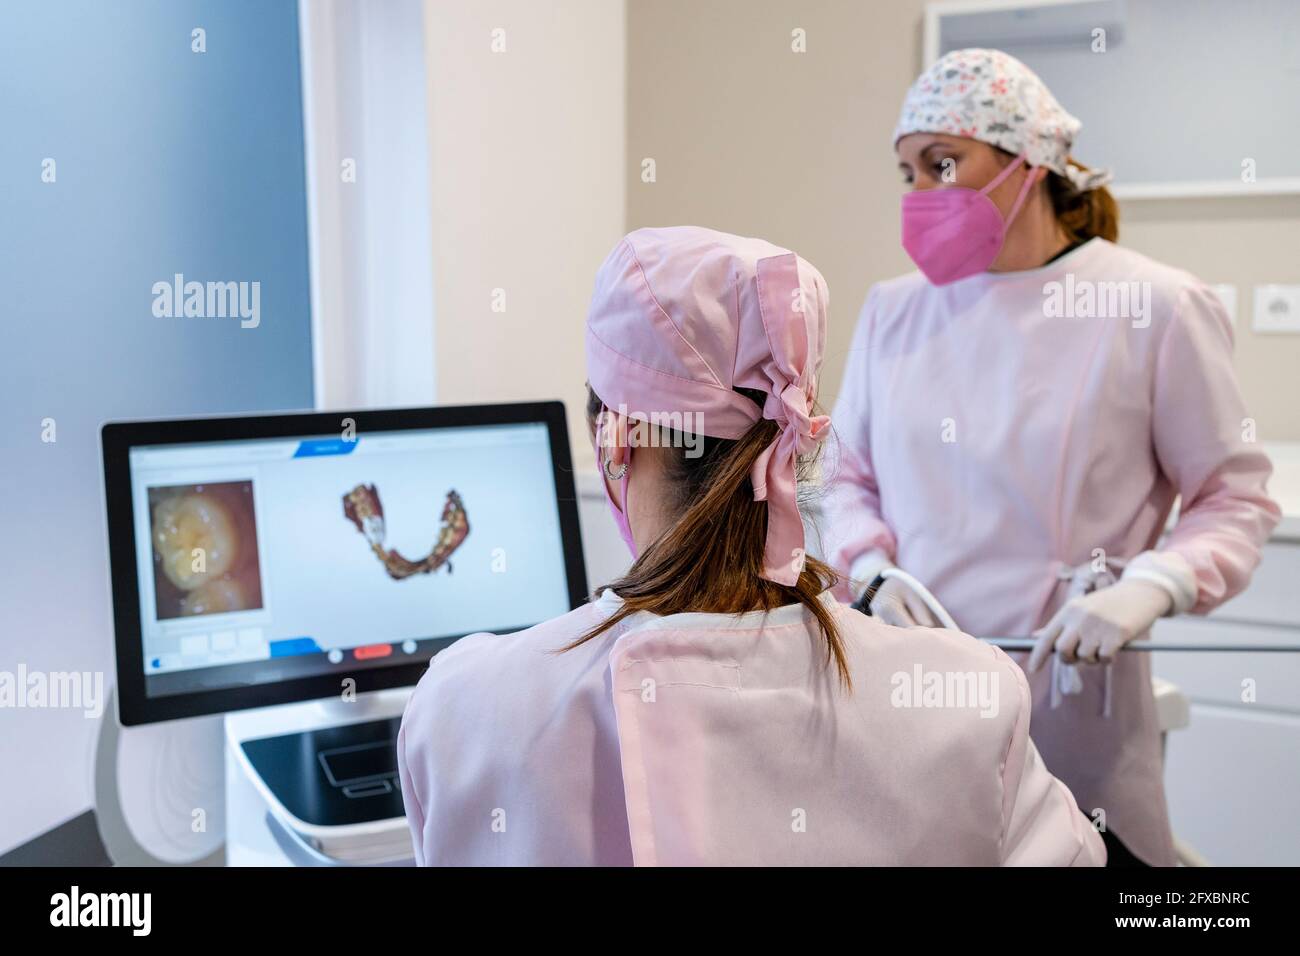 Female dentists wearing surgical cap examining digital image of teeth on screen at clinic Stock Photo